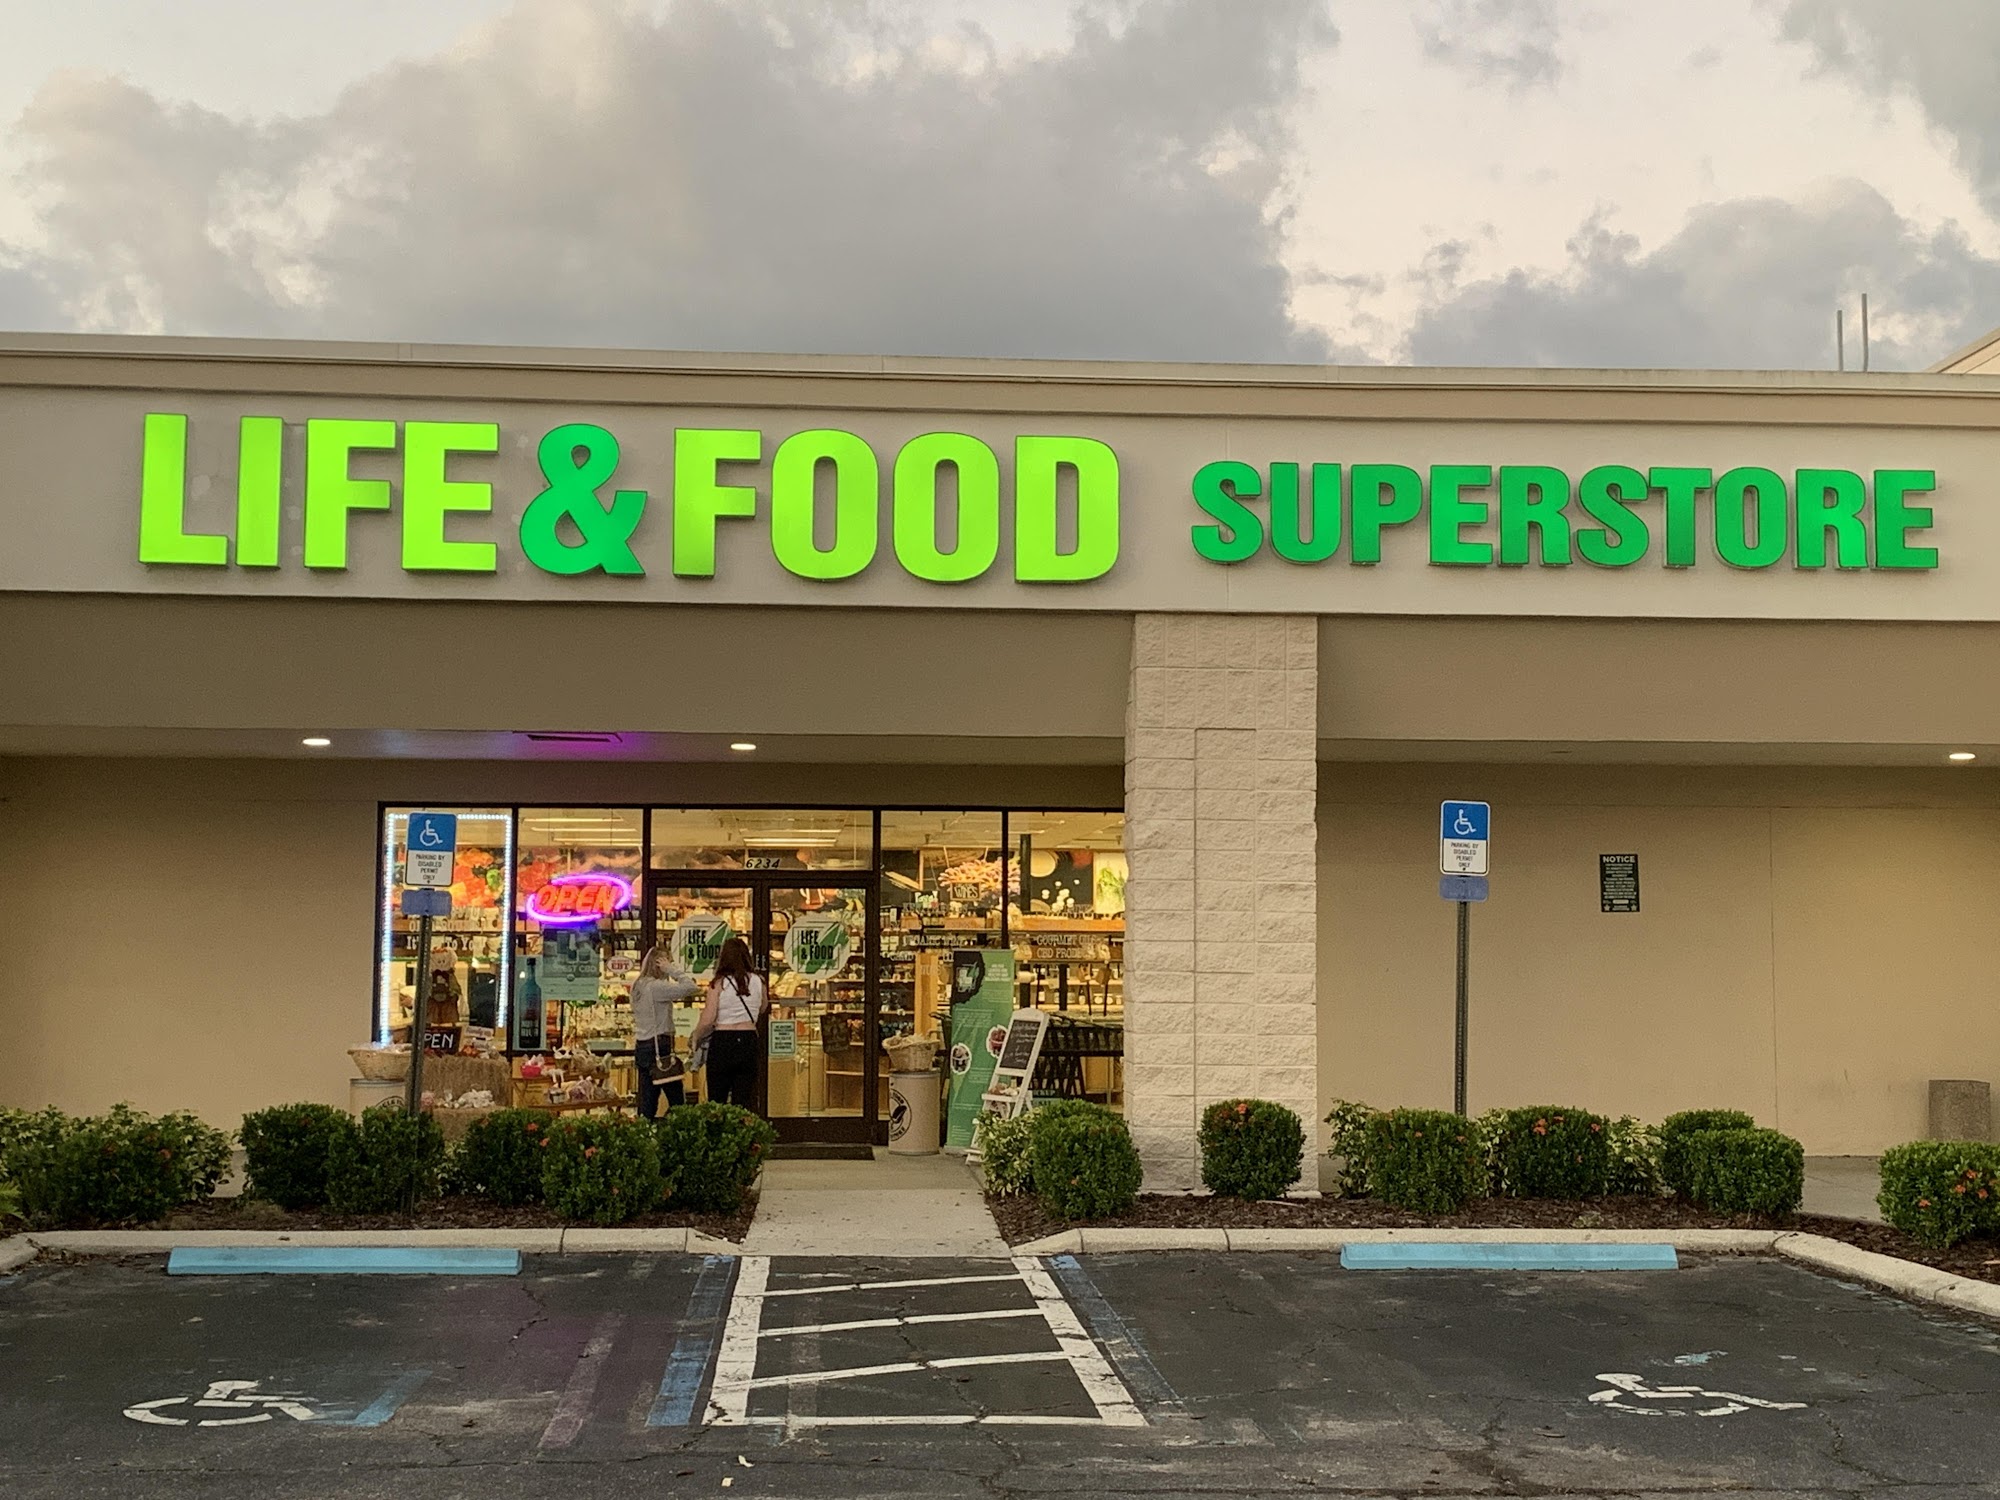 Life & Food Superstore